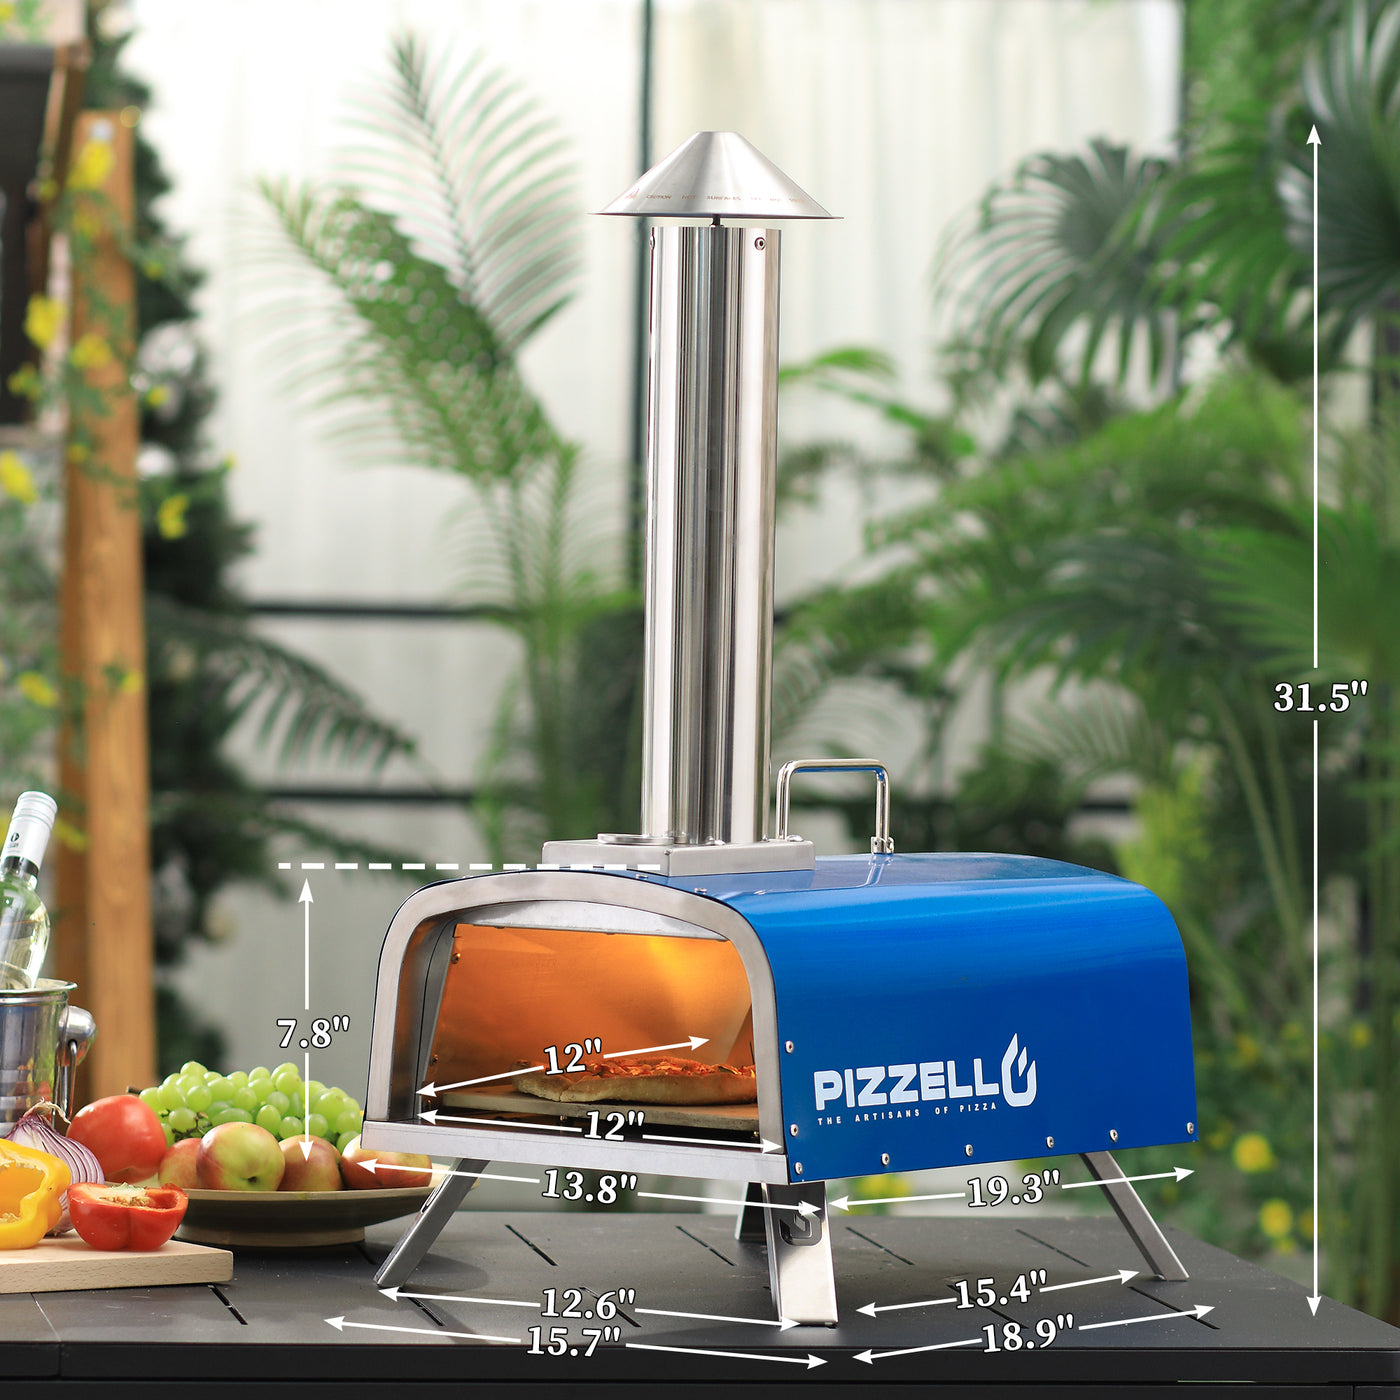 Pizzello Forte Gas - Outdoor Pizza Oven Propane & Wood